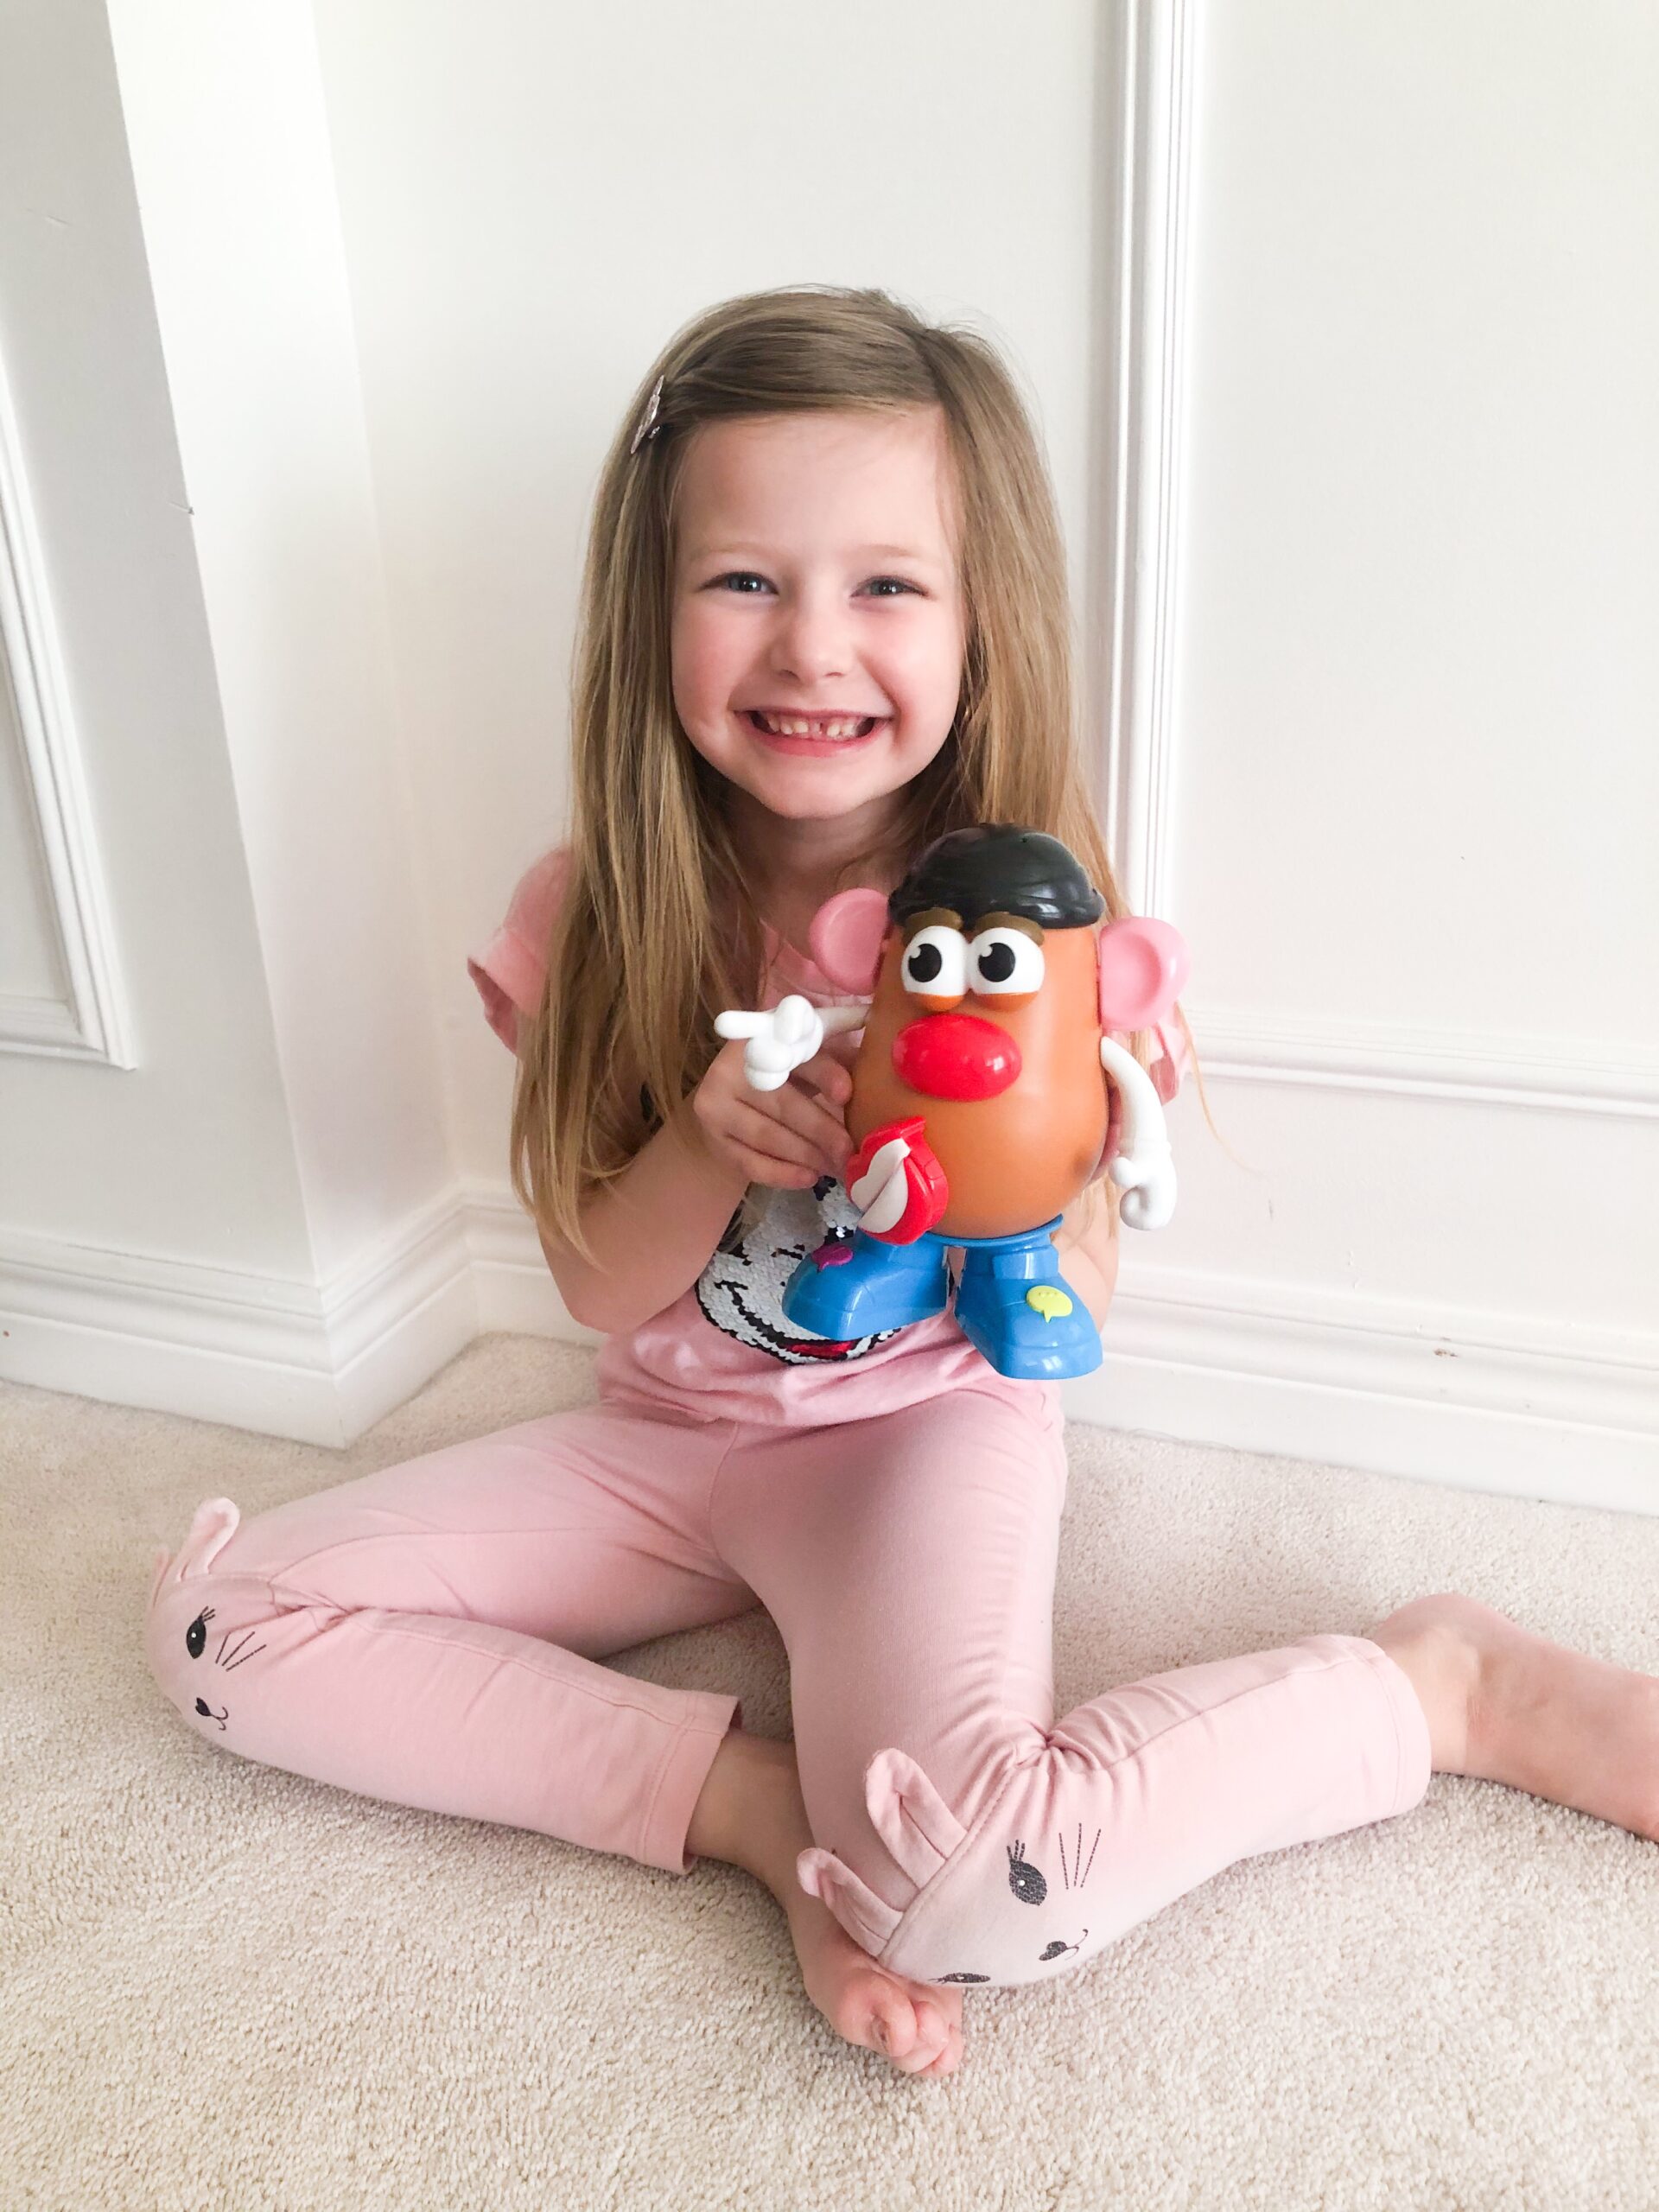 Hasbro Mr Potato Head Movin lips Review on Livin' life with Style 